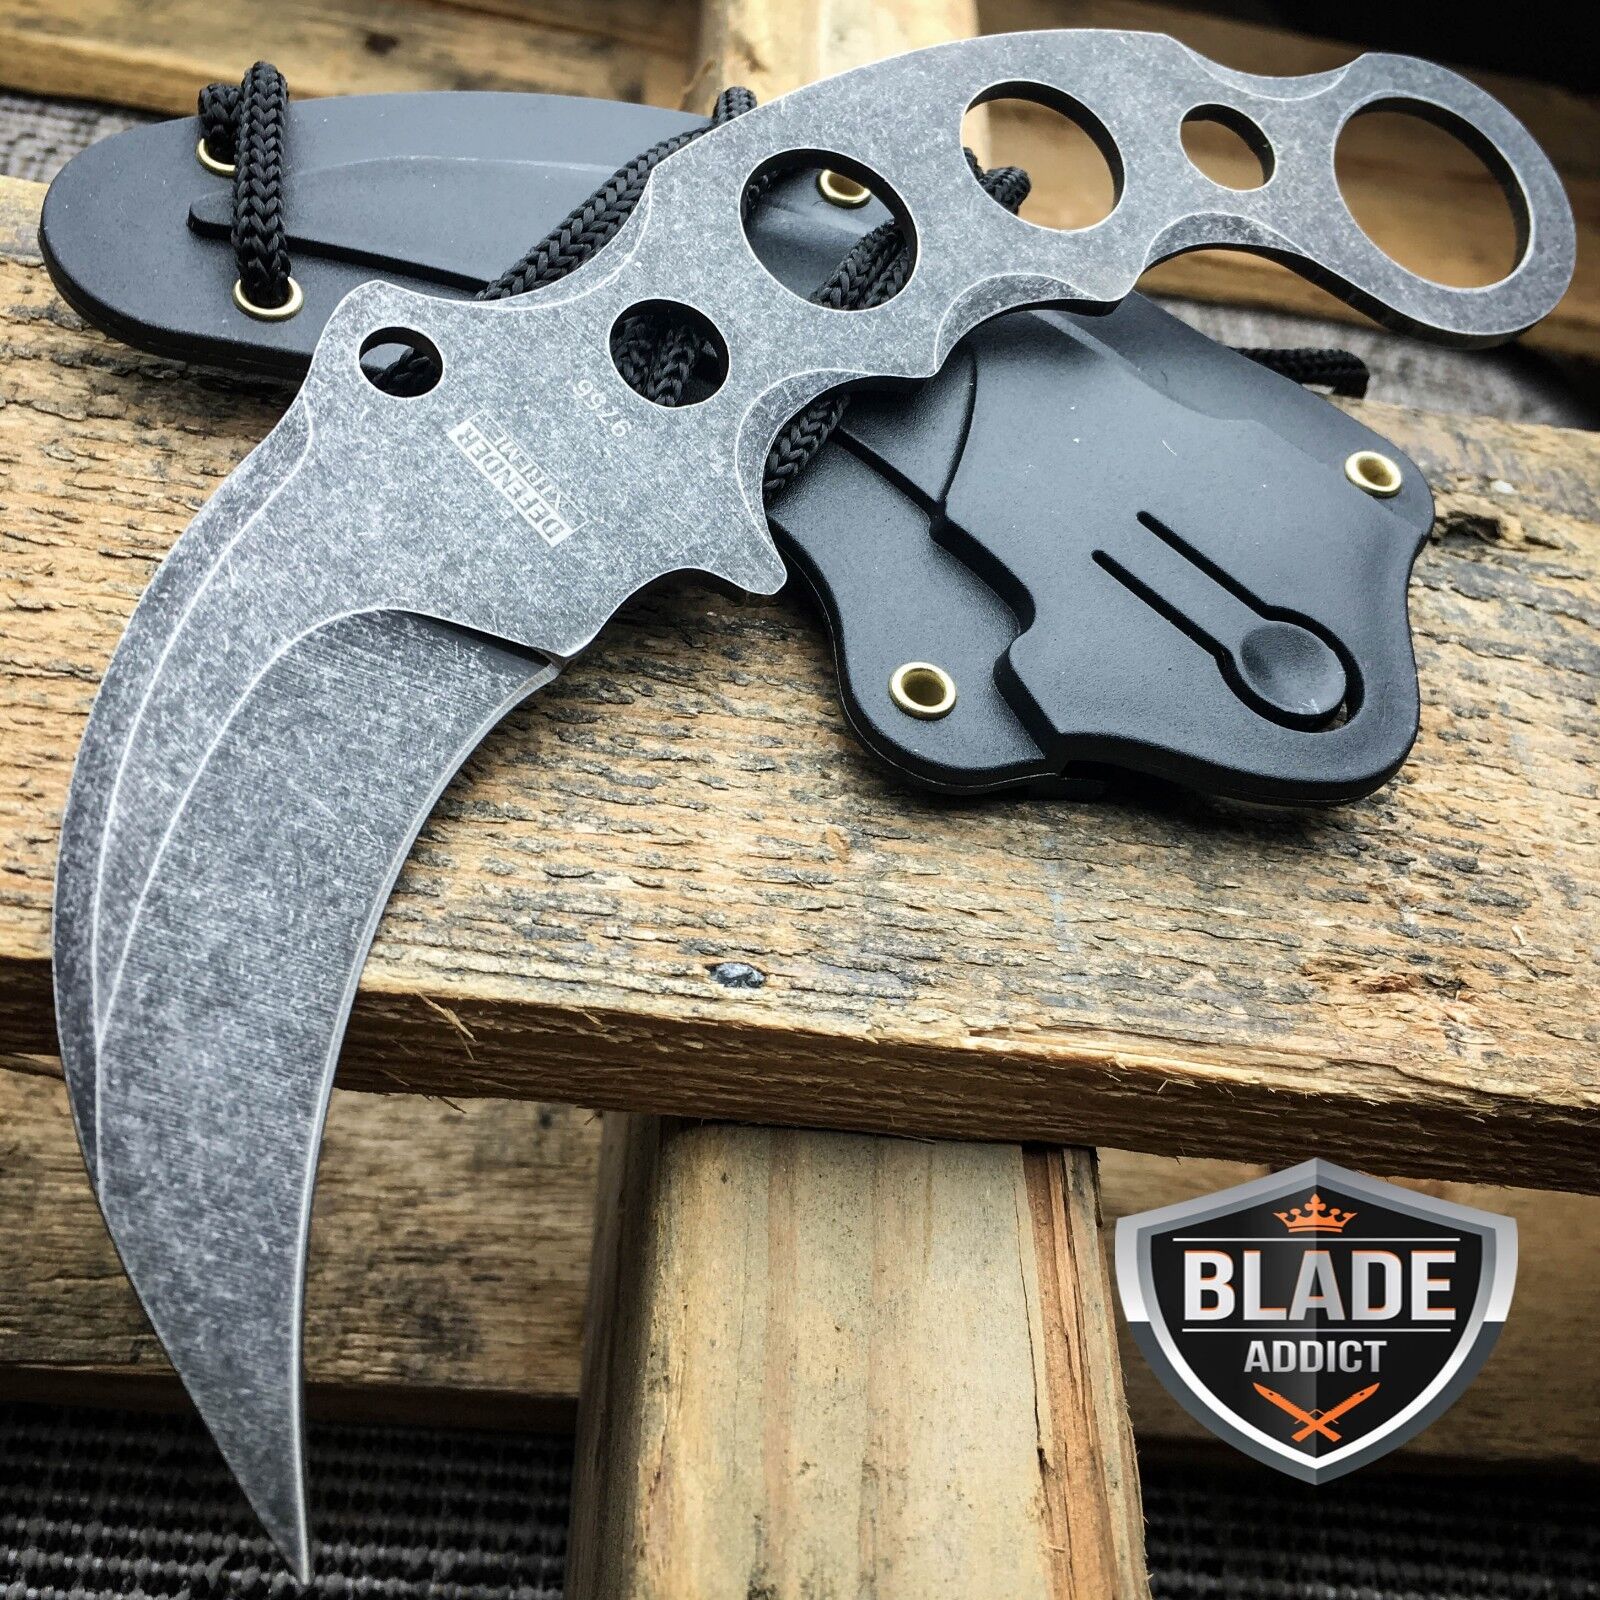 TACTICAL STONEWASH COMBAT KARAMBIT NECK KNIFE Survival Hunting BOWIE Fixed Blade DEFENDER XTREME